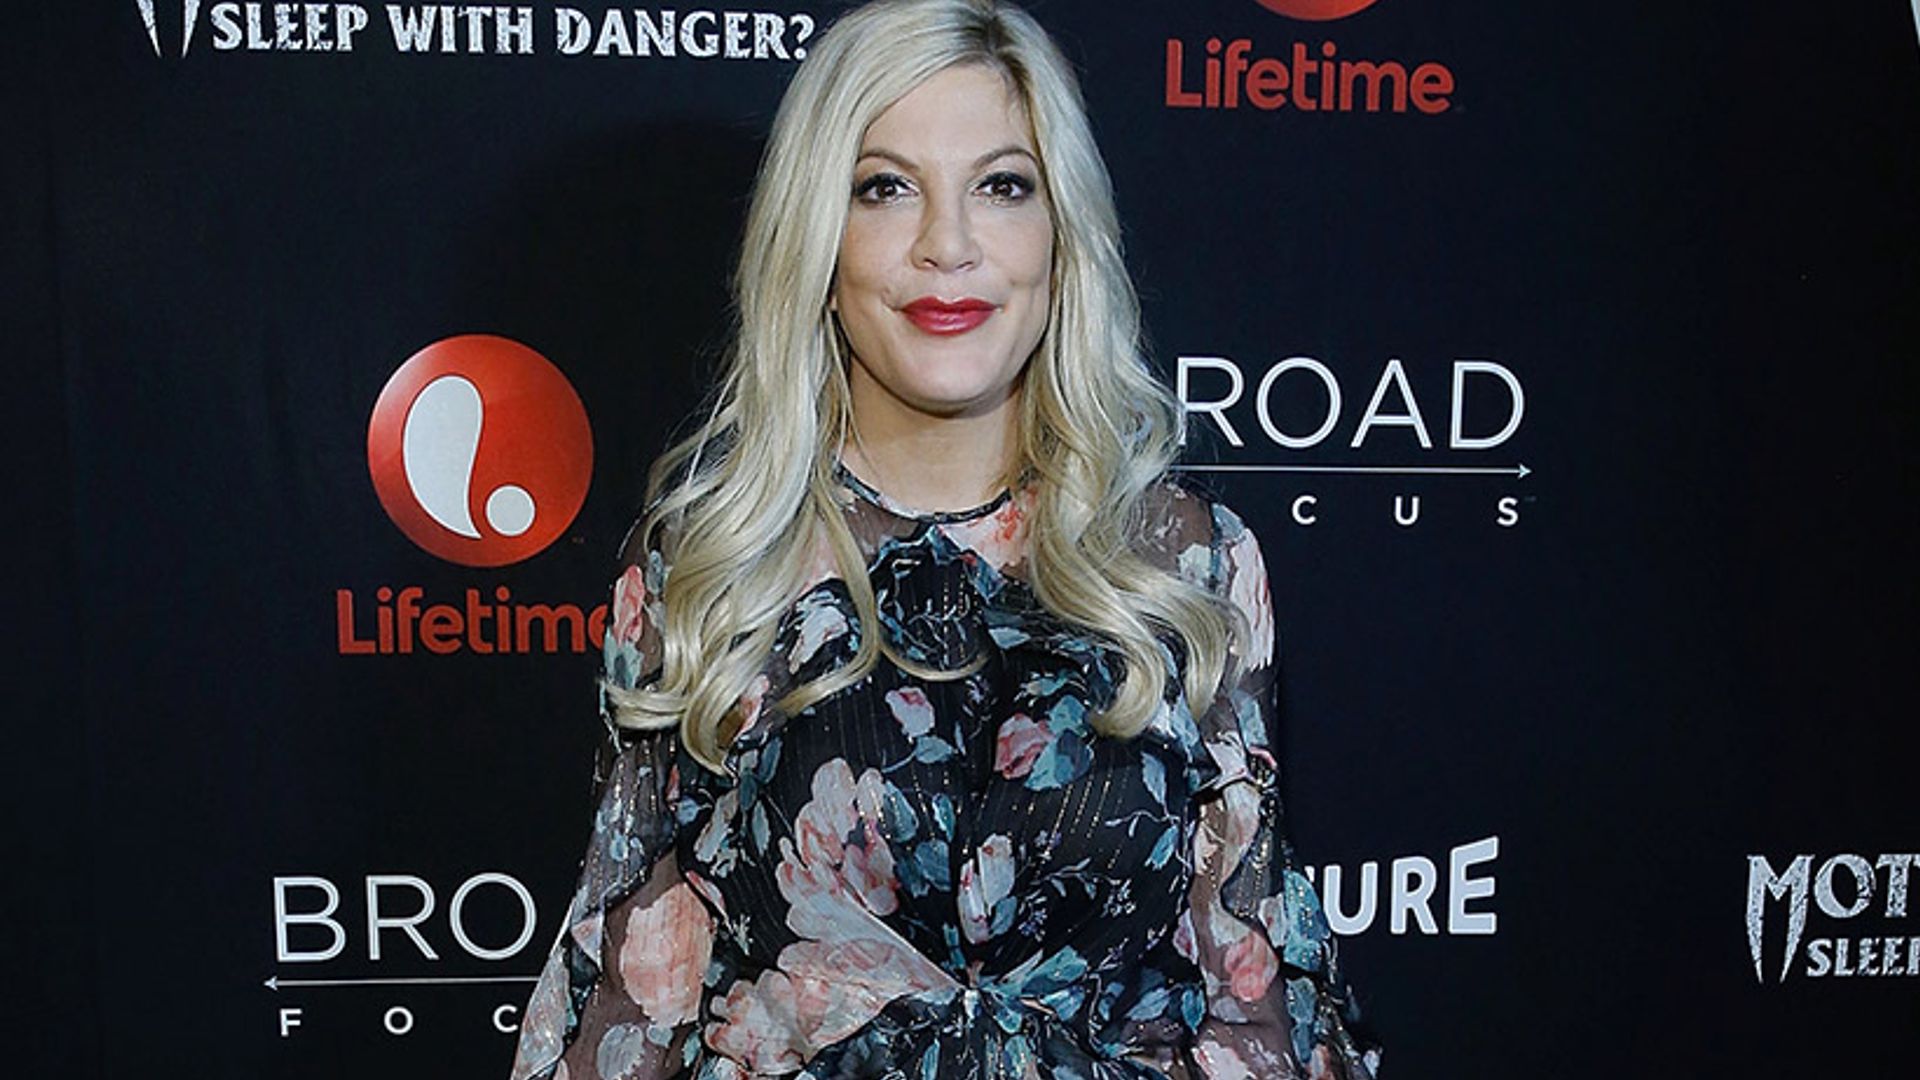 Tori Spelling is no longer a blonde! Check out her bold new hair colour here...